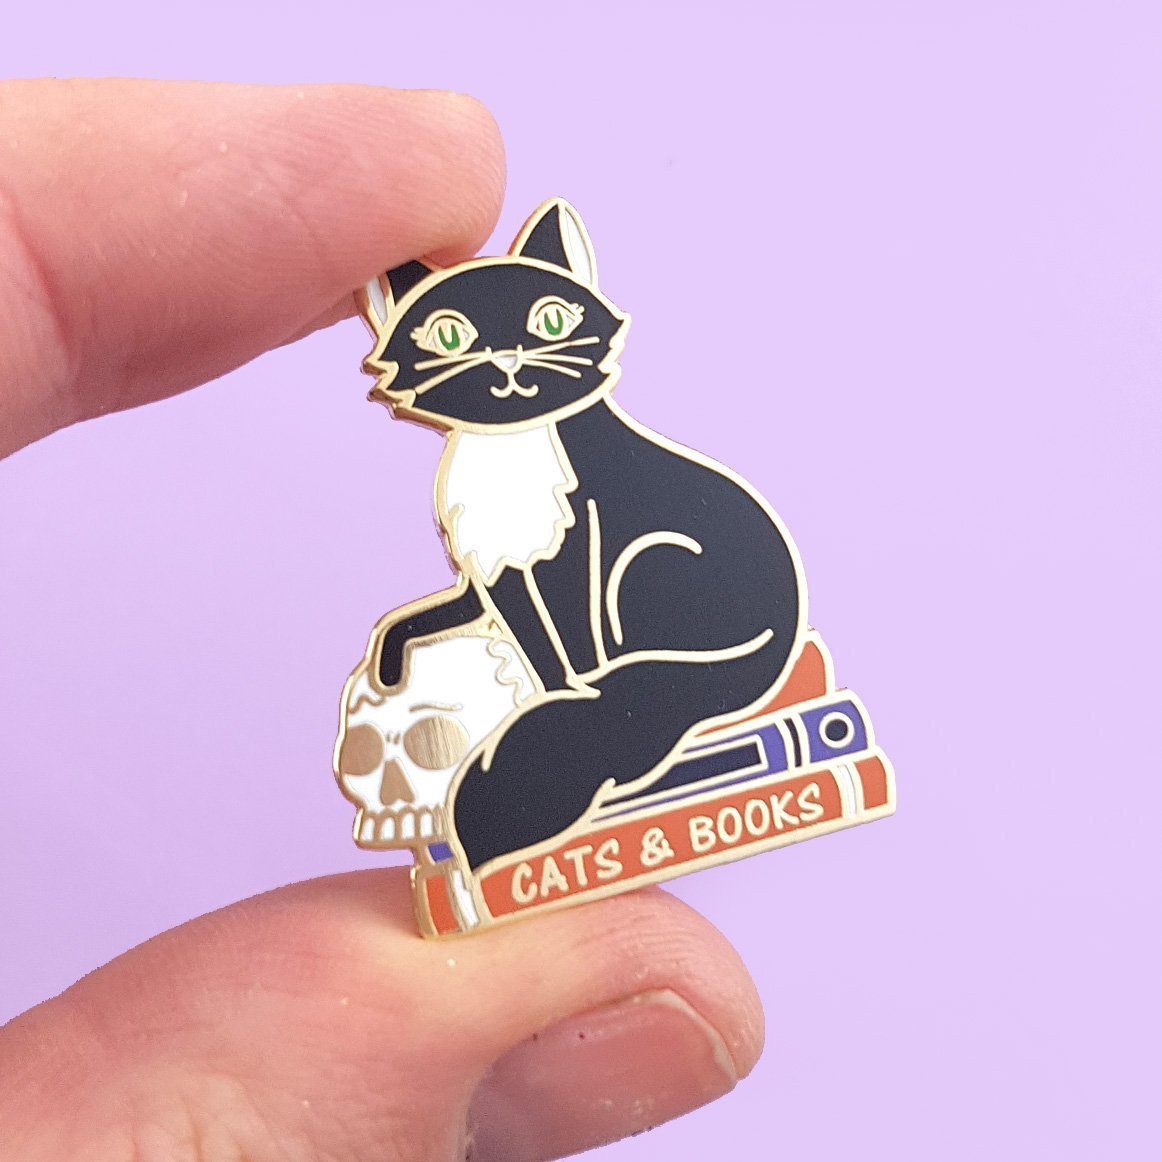 Cats and Books Enamel Pin